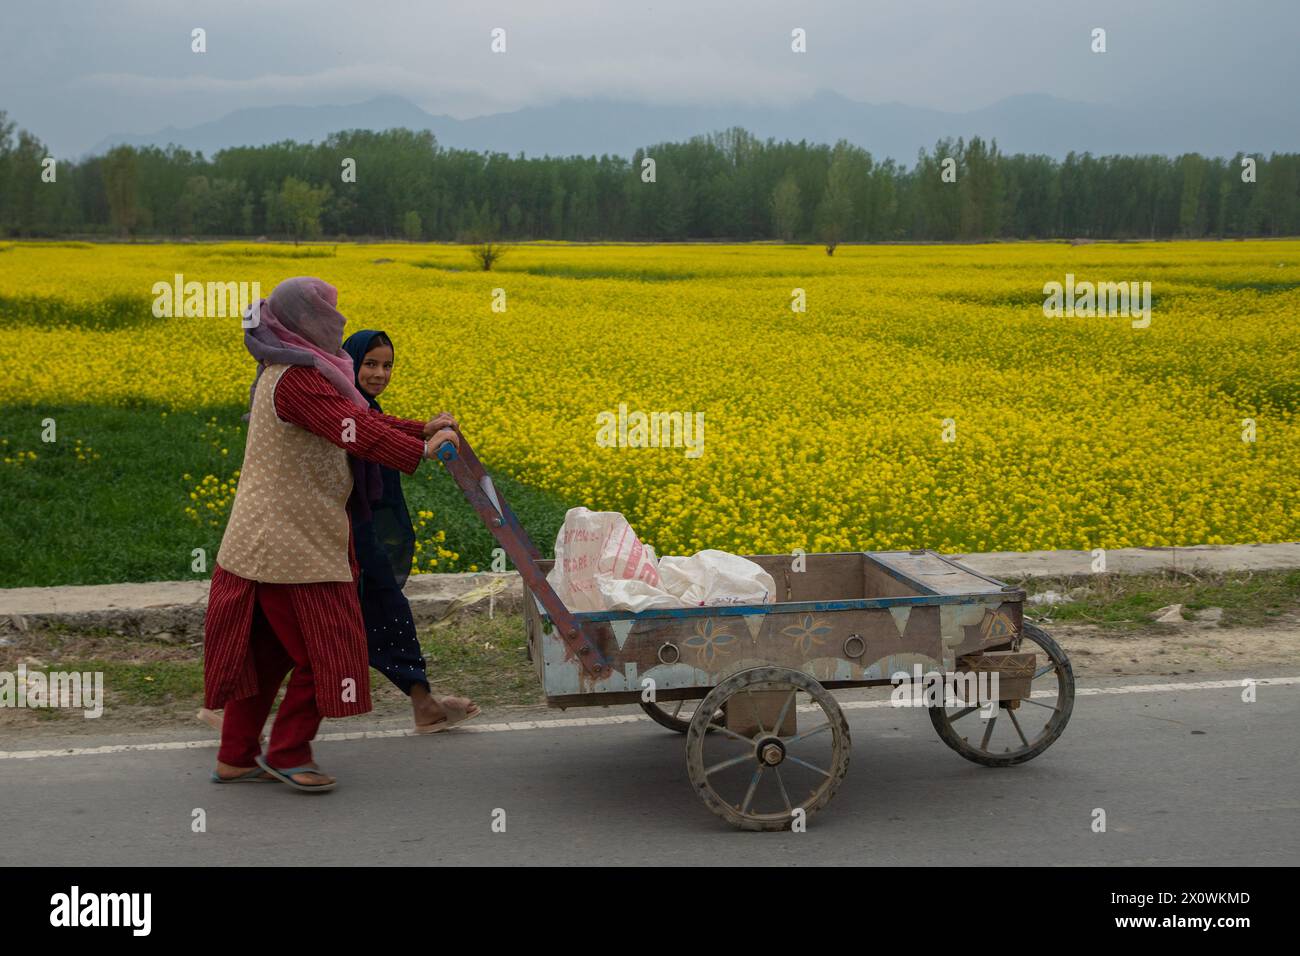 A Kashmiri woman with her daughter pushes a handcart alongside blooming mustard fields during the spring season in Pulwama, south of Srinagar. The spring season in Kashmir valley is a period of two long months starting from mid-March and ends in mid-May. According to the Directorate of Agriculture of the state government of Jammu and Kashmir, the Kashmir valley comprising six districts has an estimated area of 65 thousand hectares of paddy land under mustard cultivation, which is about 40 per cent of the total area under paddy. Stock Photo